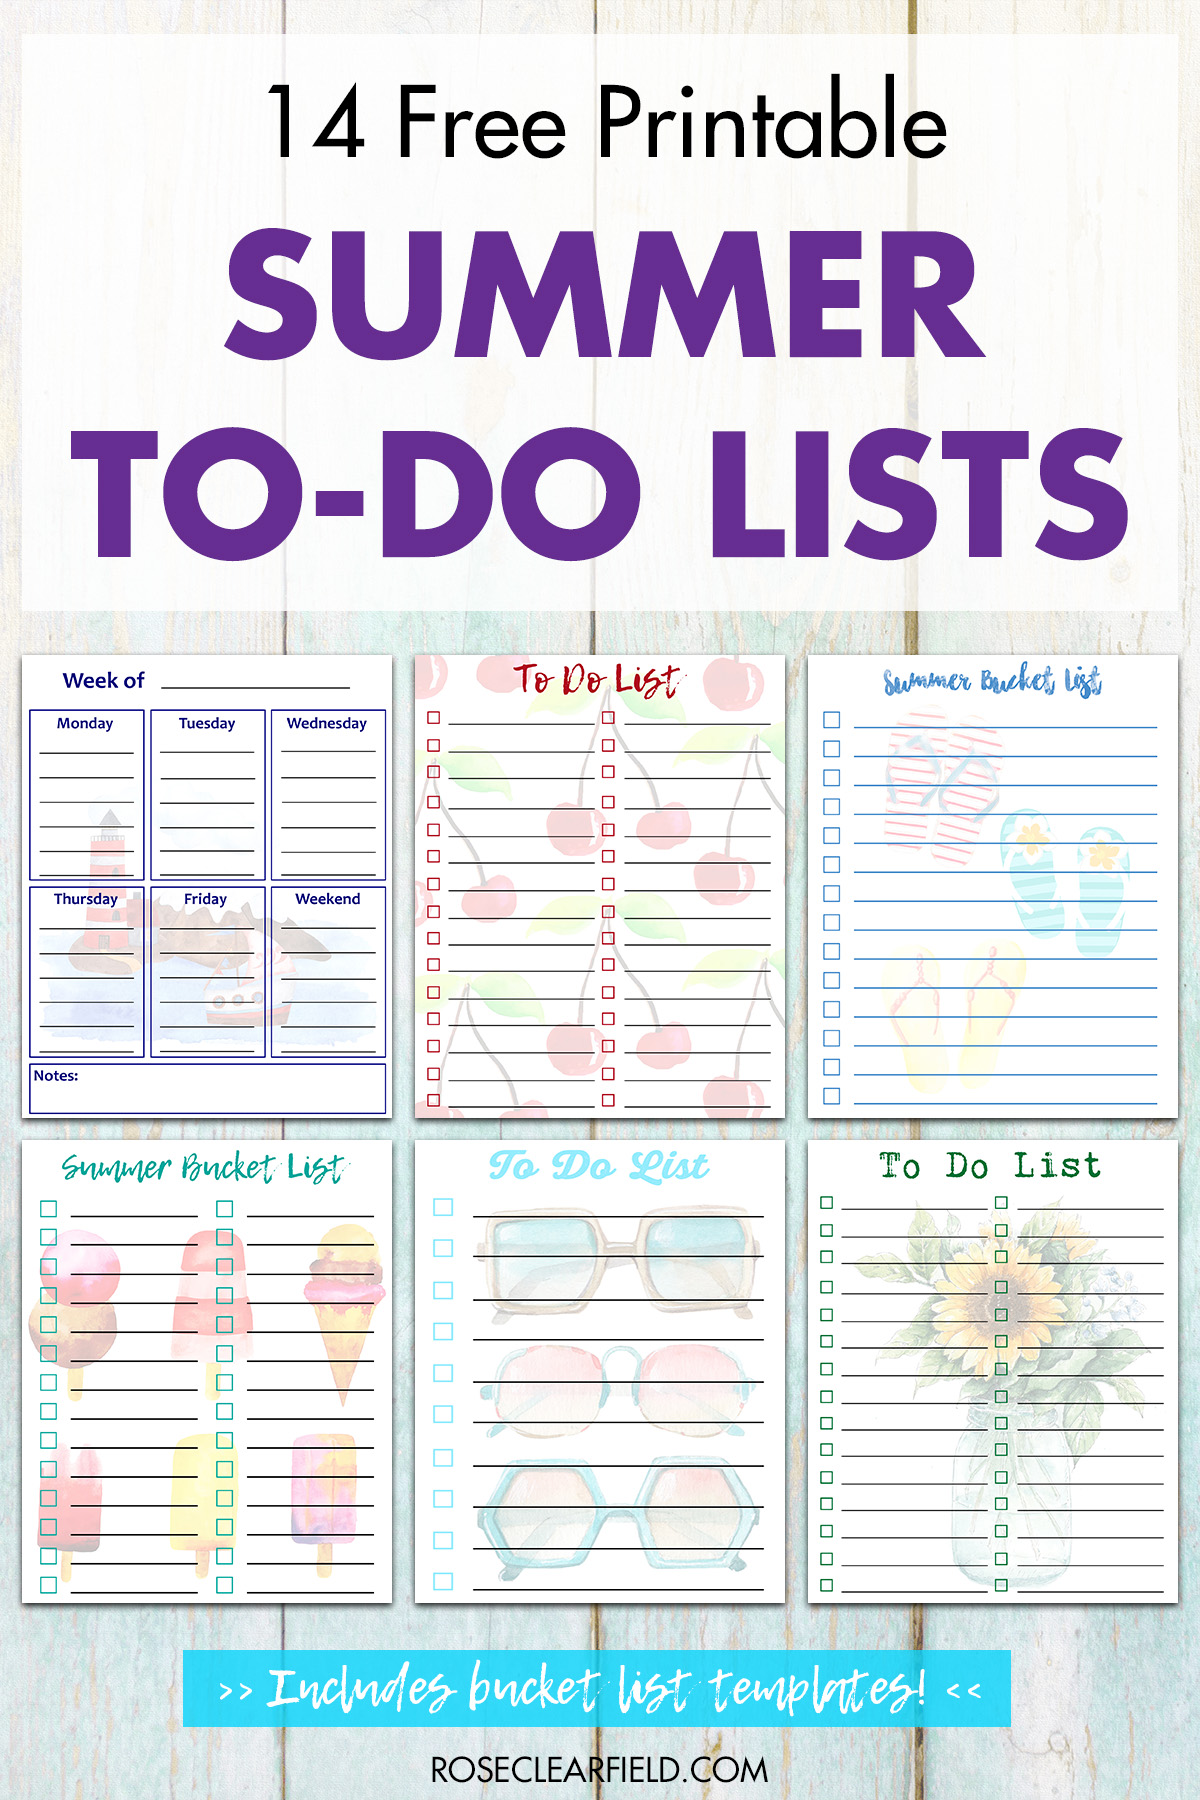 Free Printable Summer To-Do Lists • Rose Clearfield